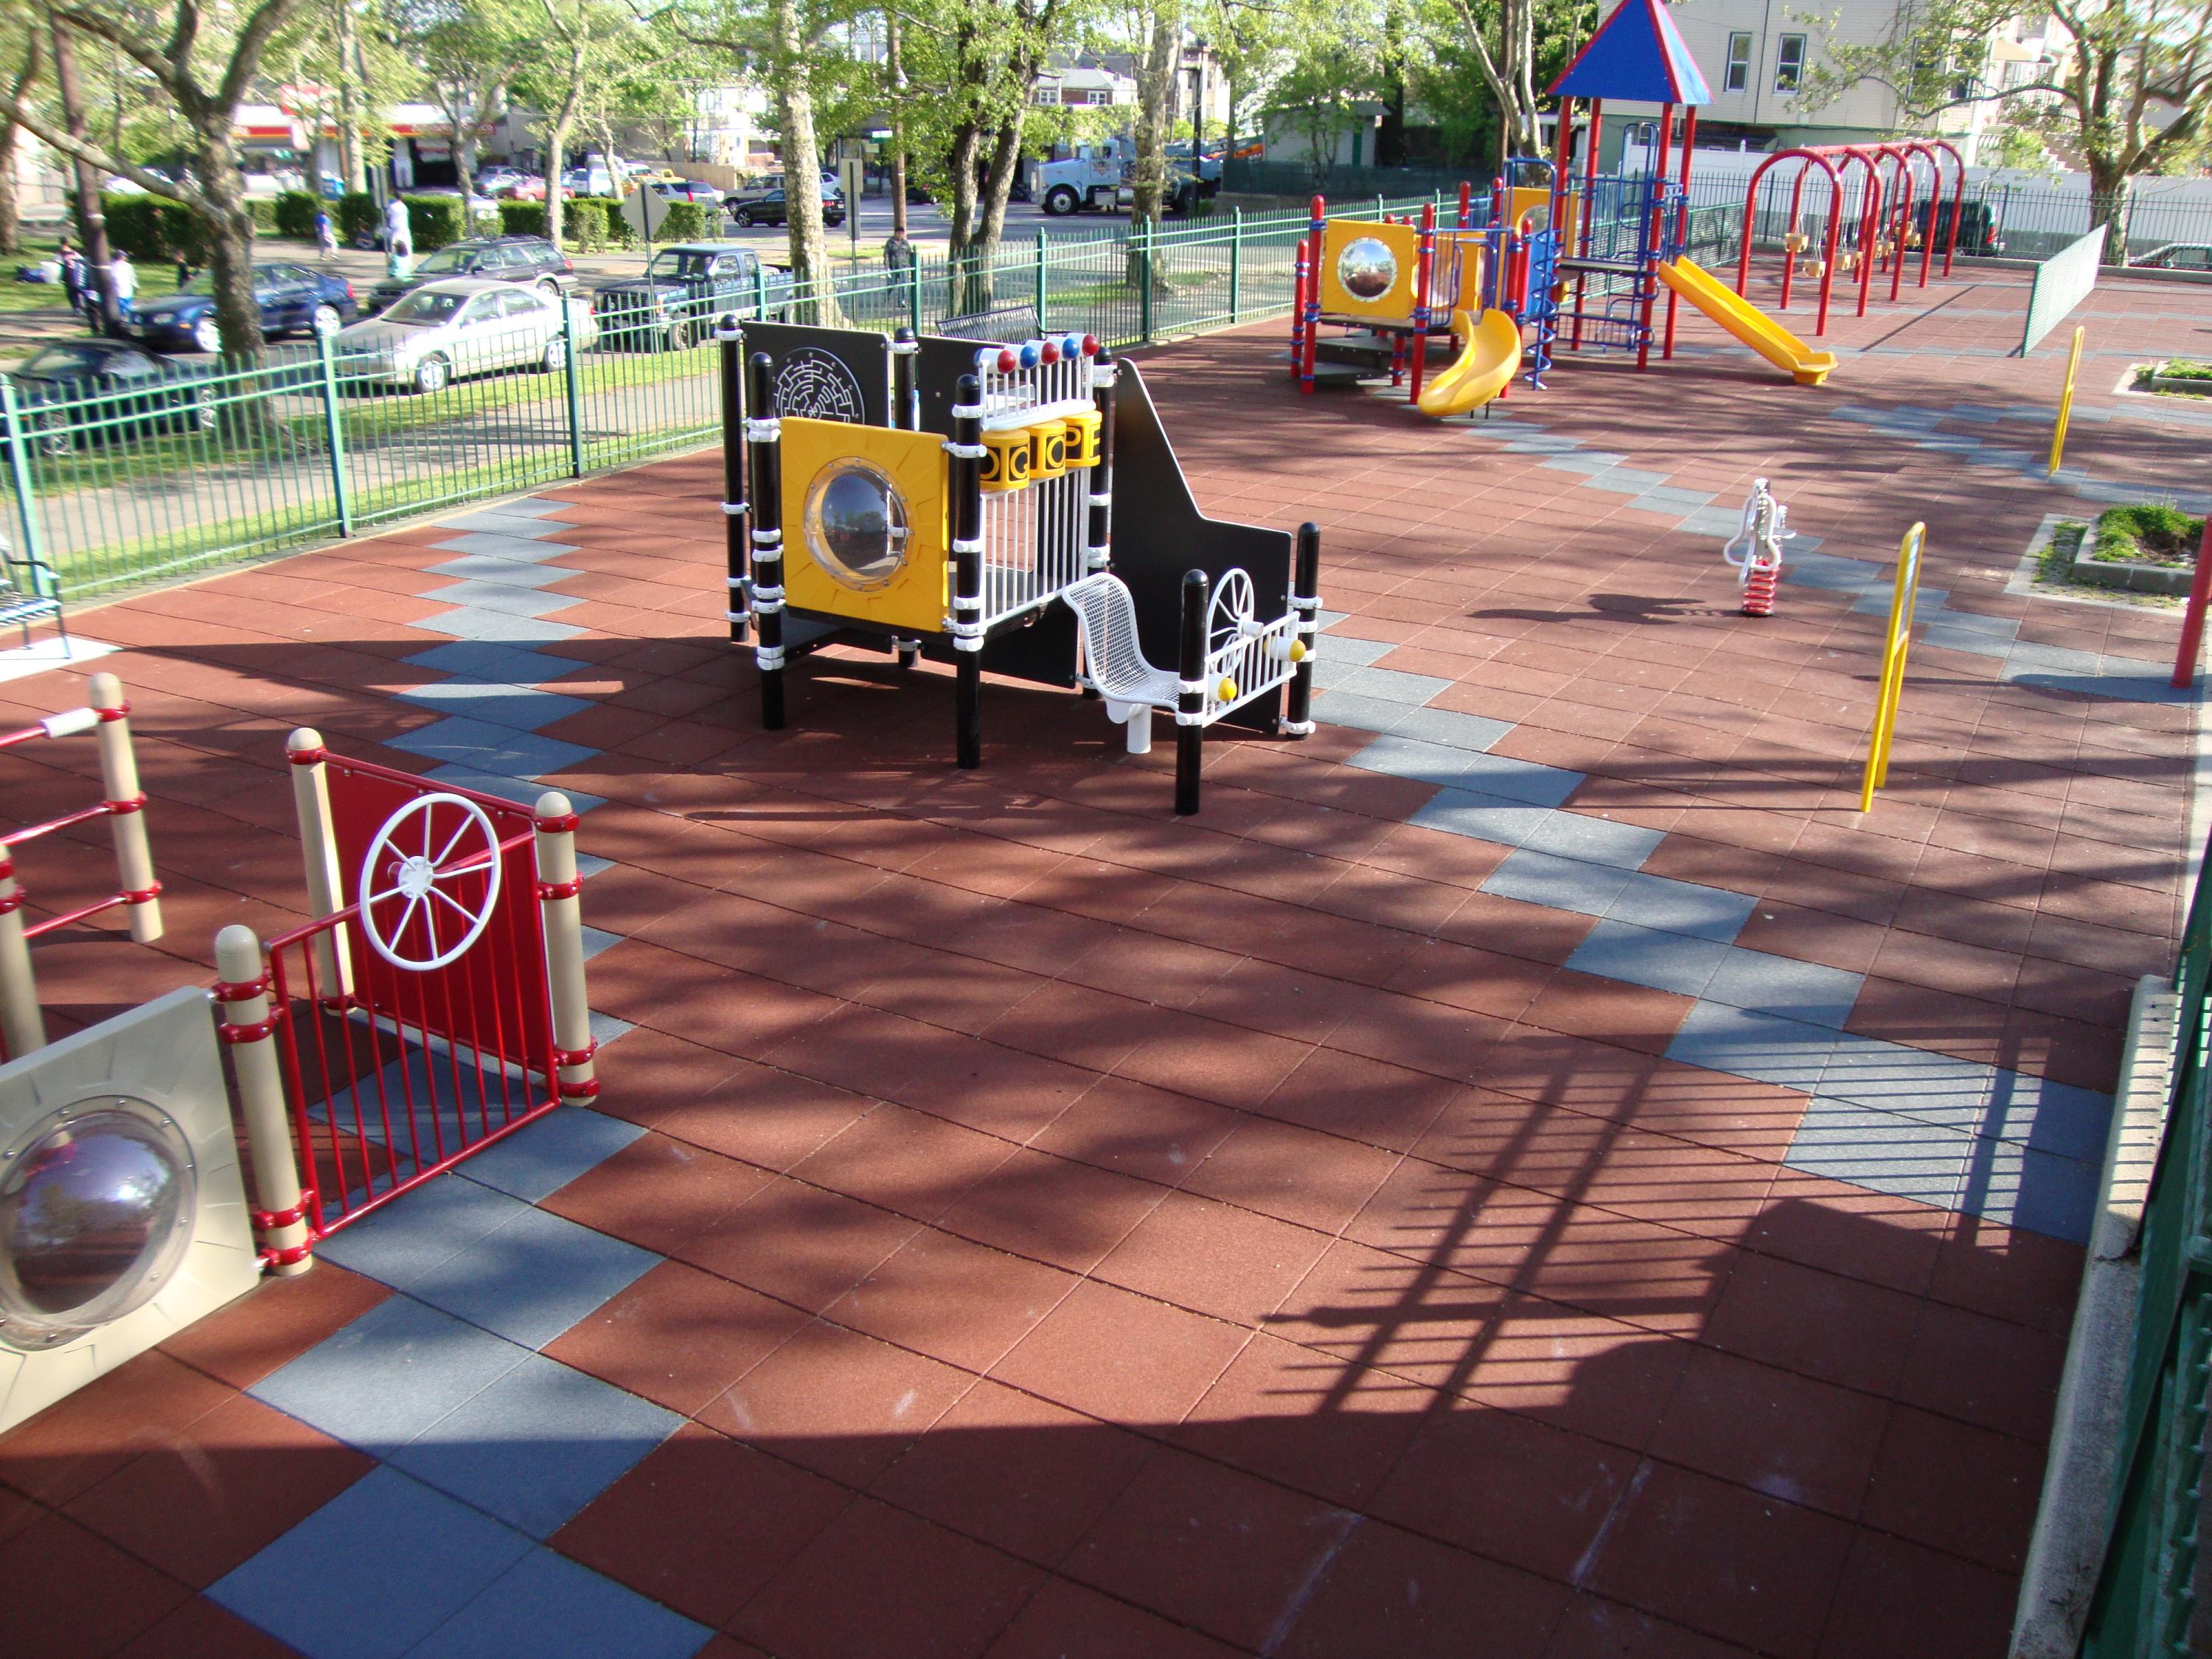 Large Public Park with Multiple Playgrounds Using Designs l